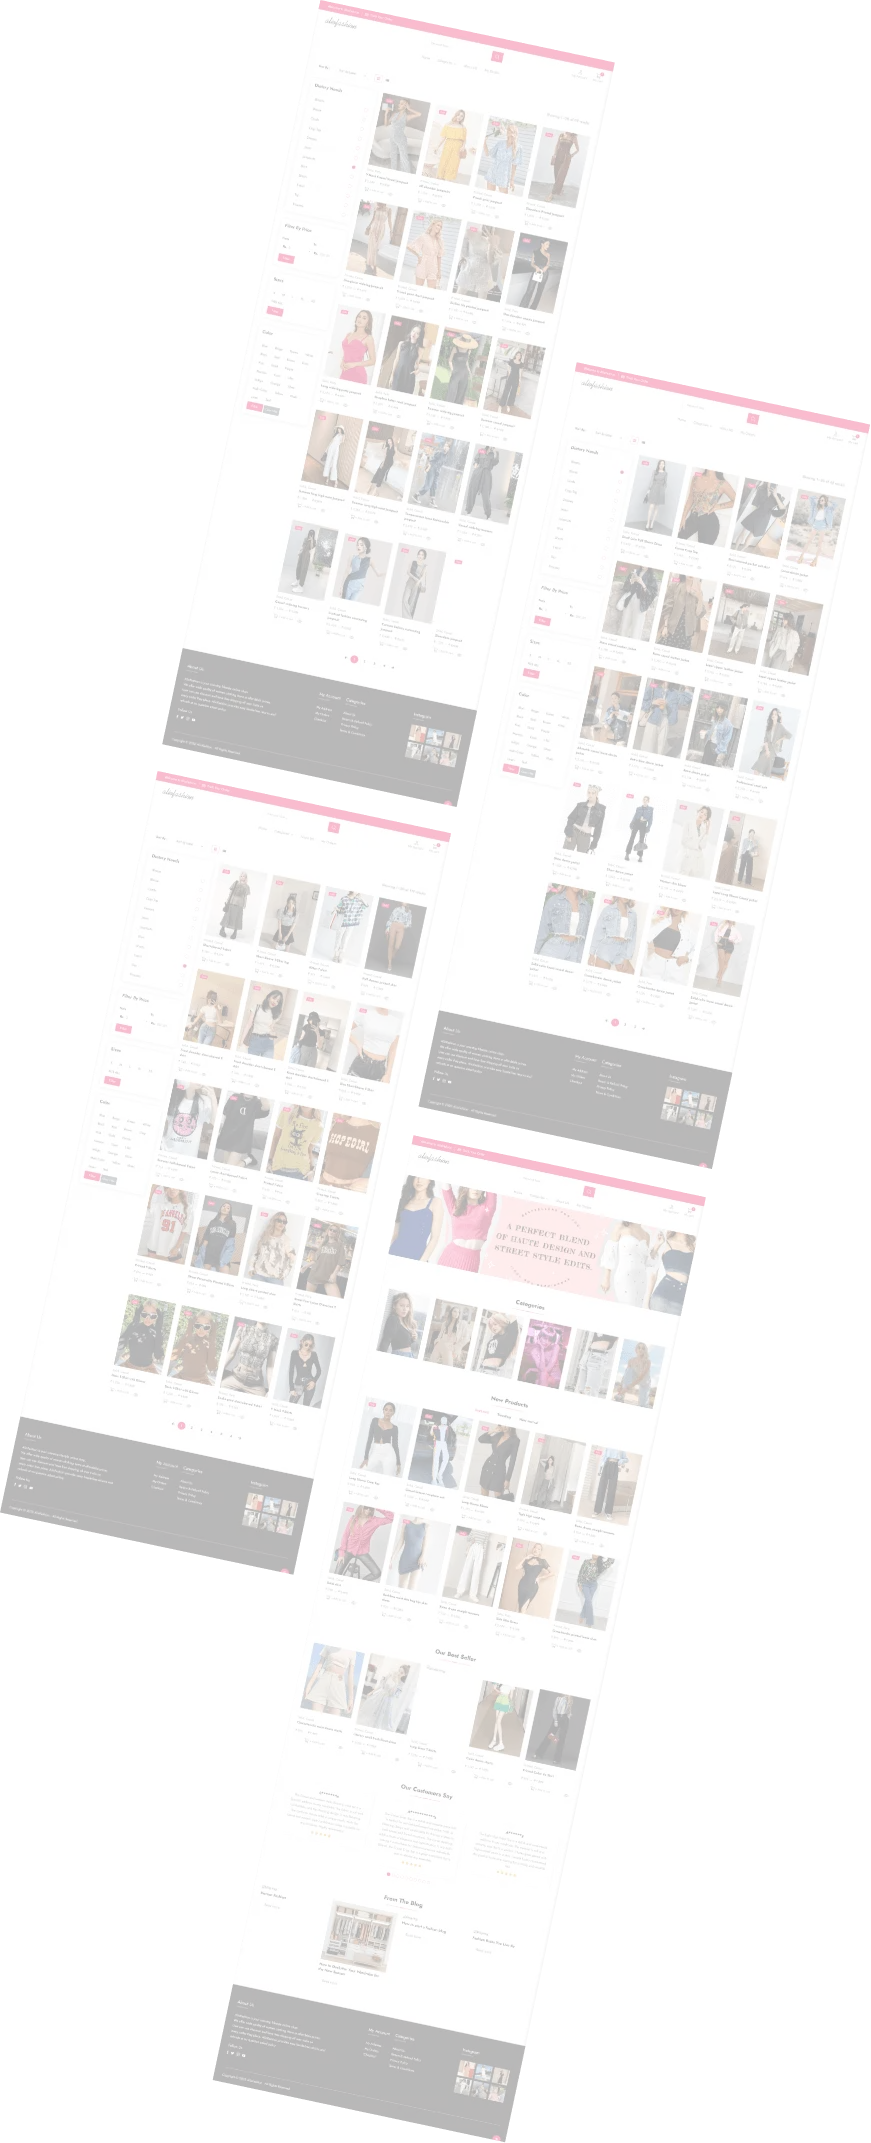 Get access to the latest fashion trends and choose trendy outfits that are comfortable, stunning and chic on AlioFashion. 